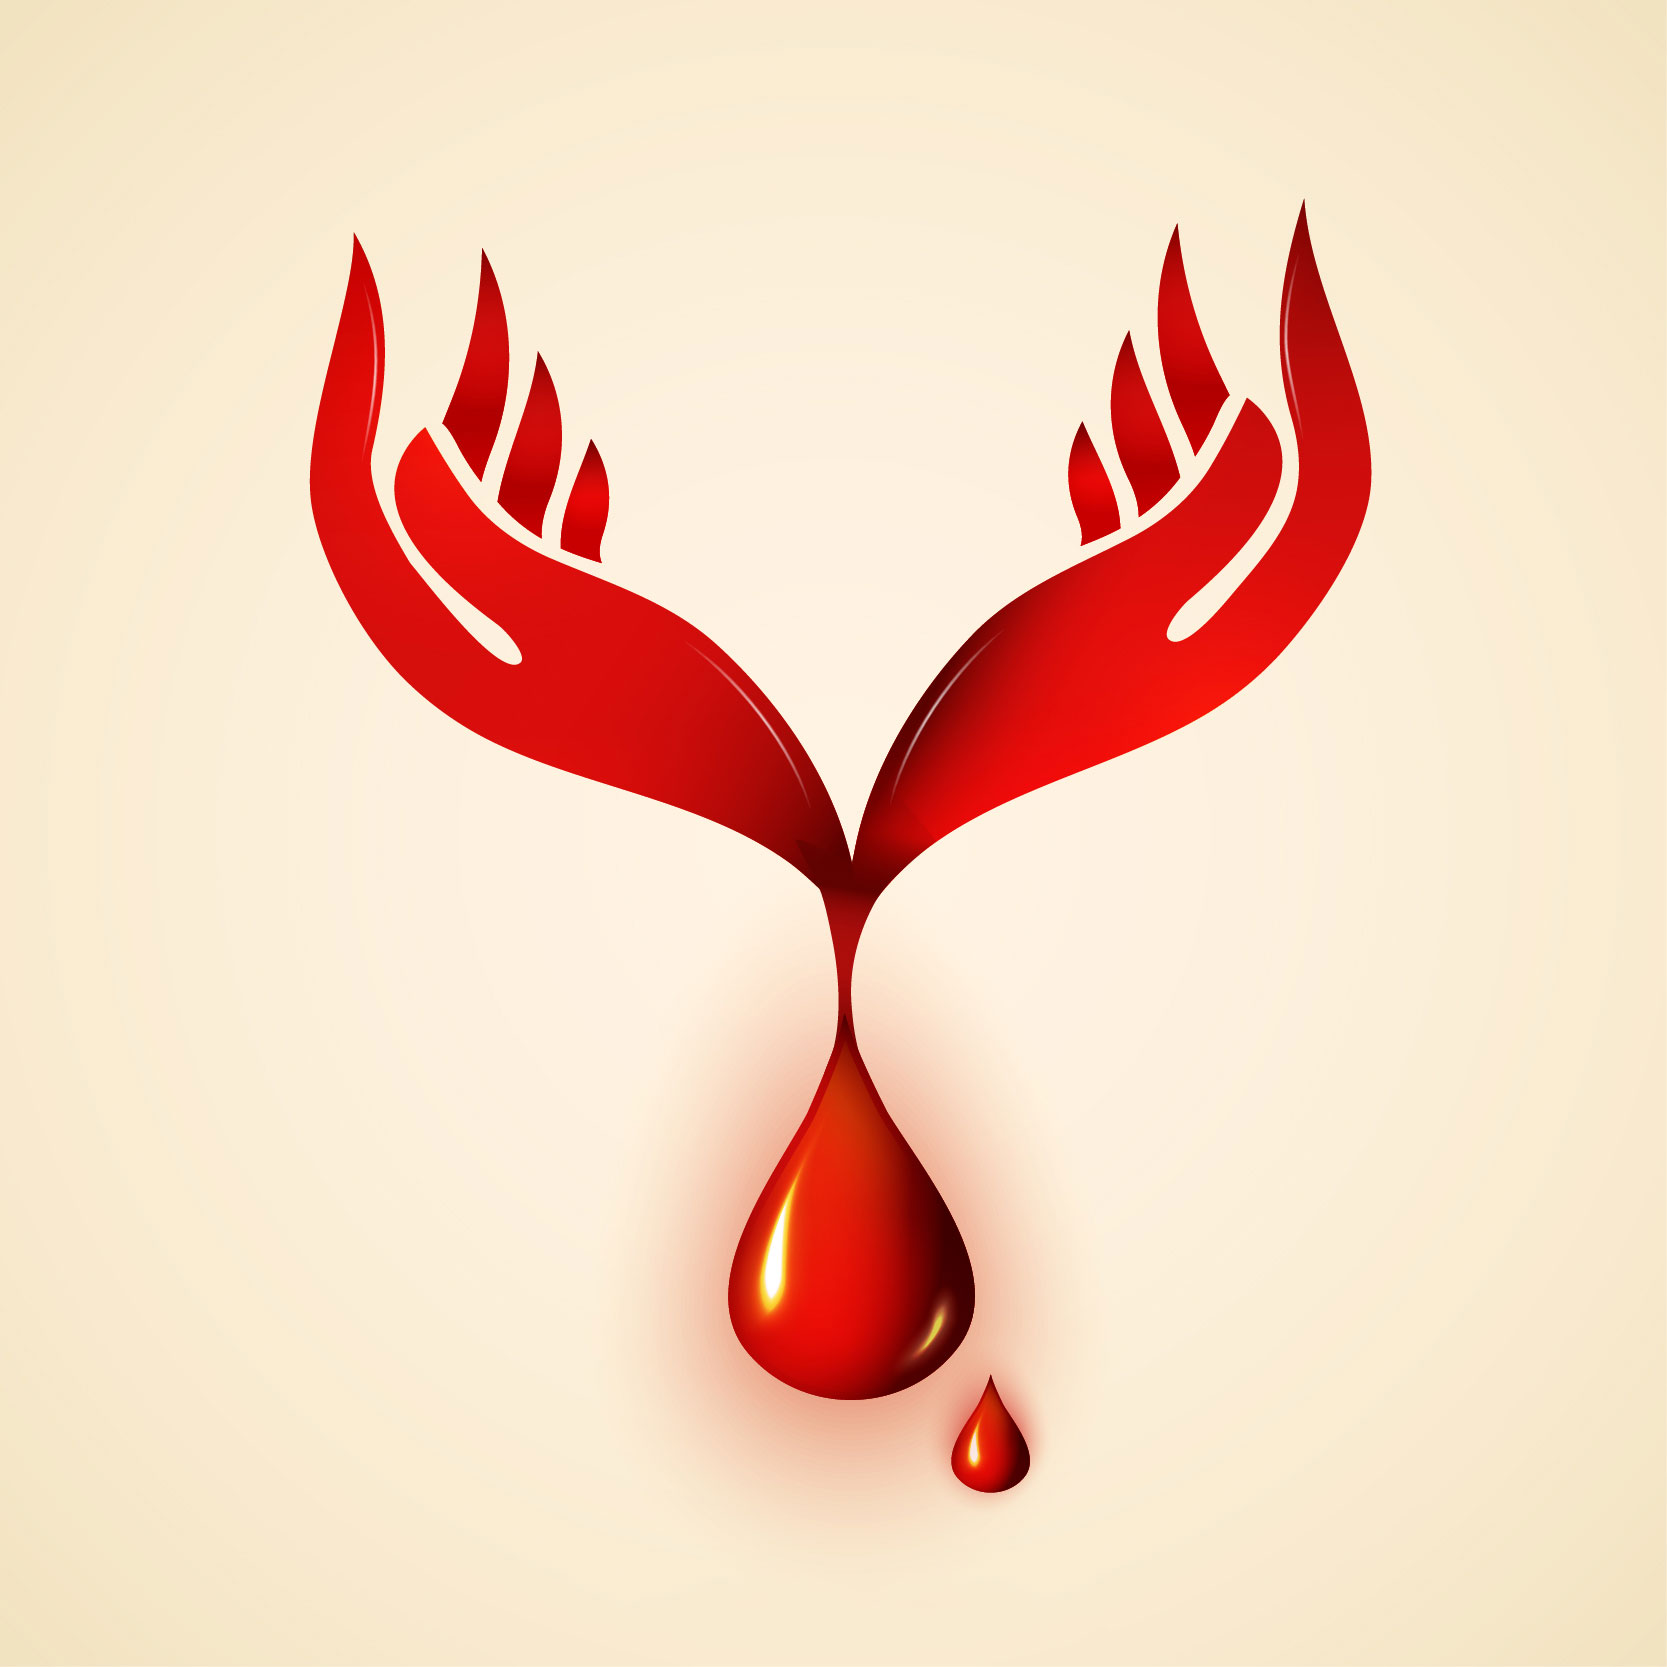 Creative Blood Donation Logo Image PNG Images | PSD Free Download - Pikbest